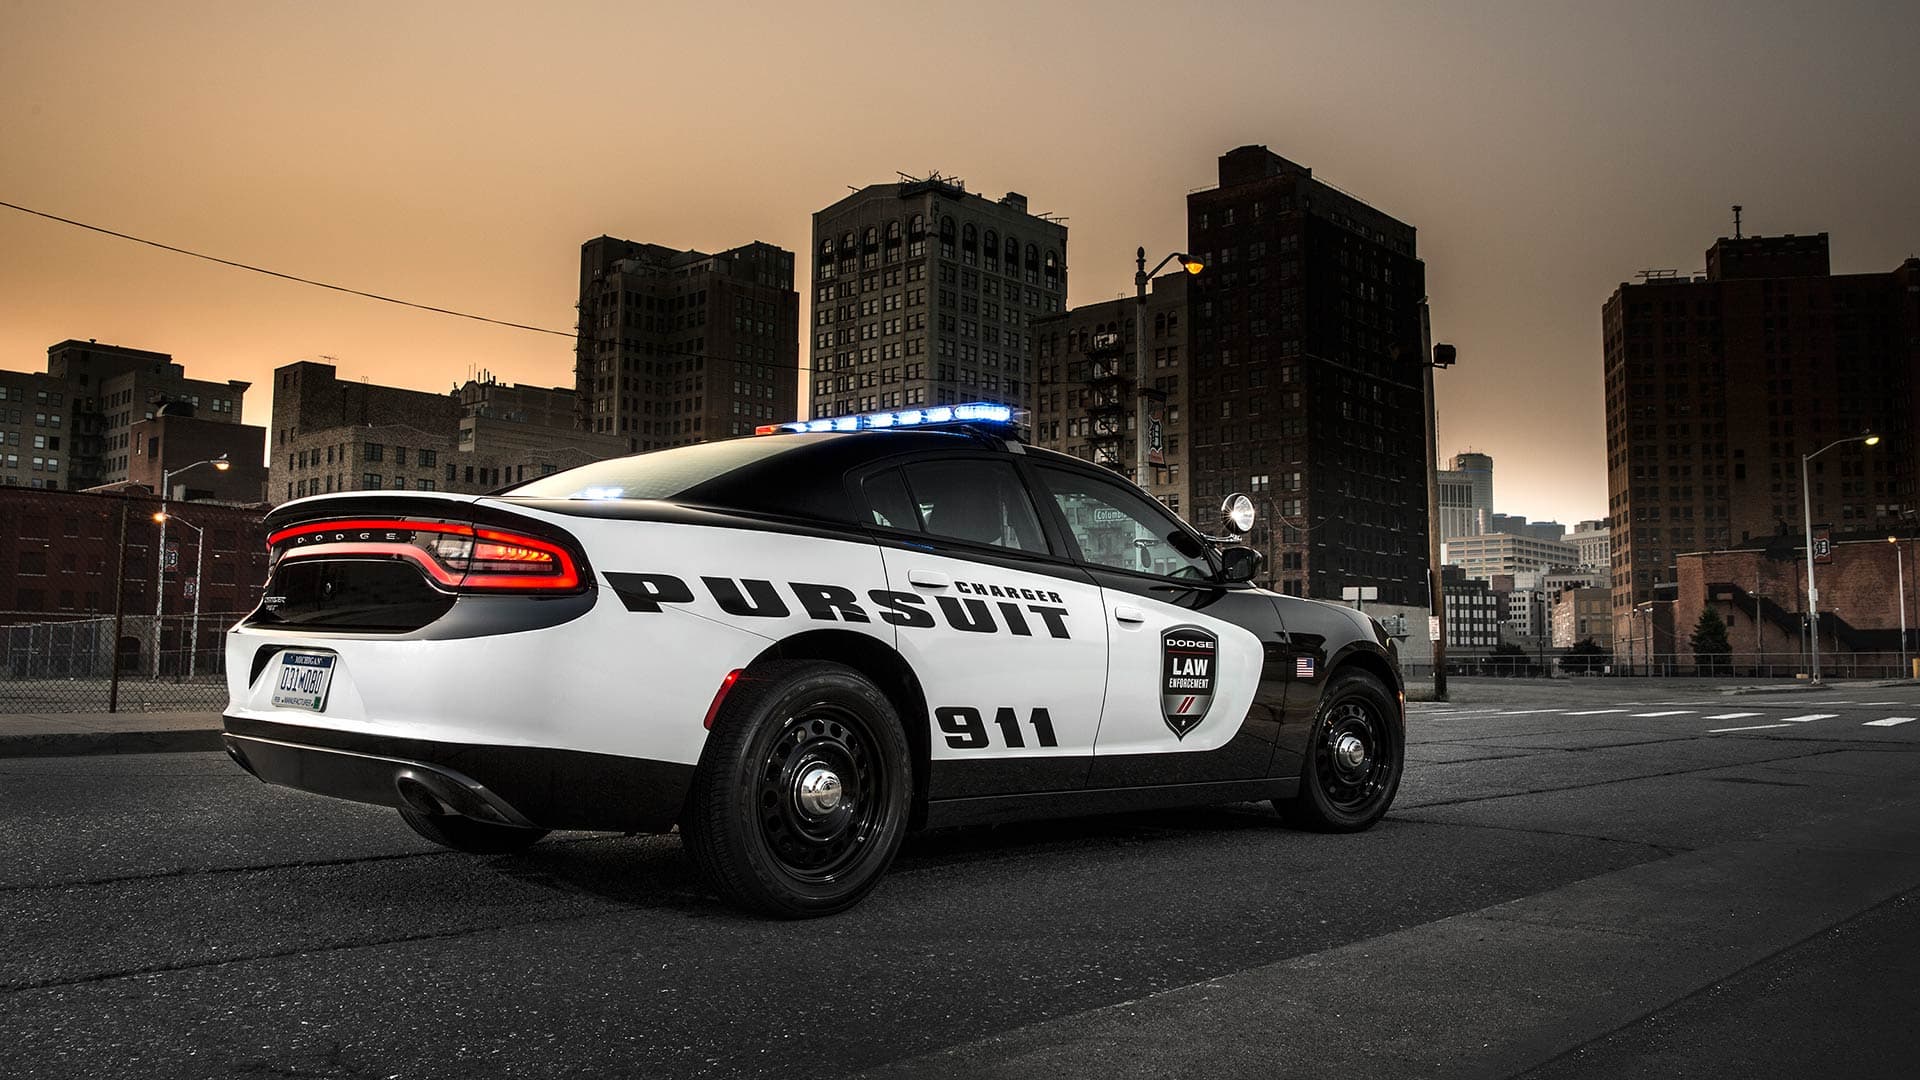 Dodge’s New Charger Police Cars Use Cameras and Radar to Protect Officers from Threats